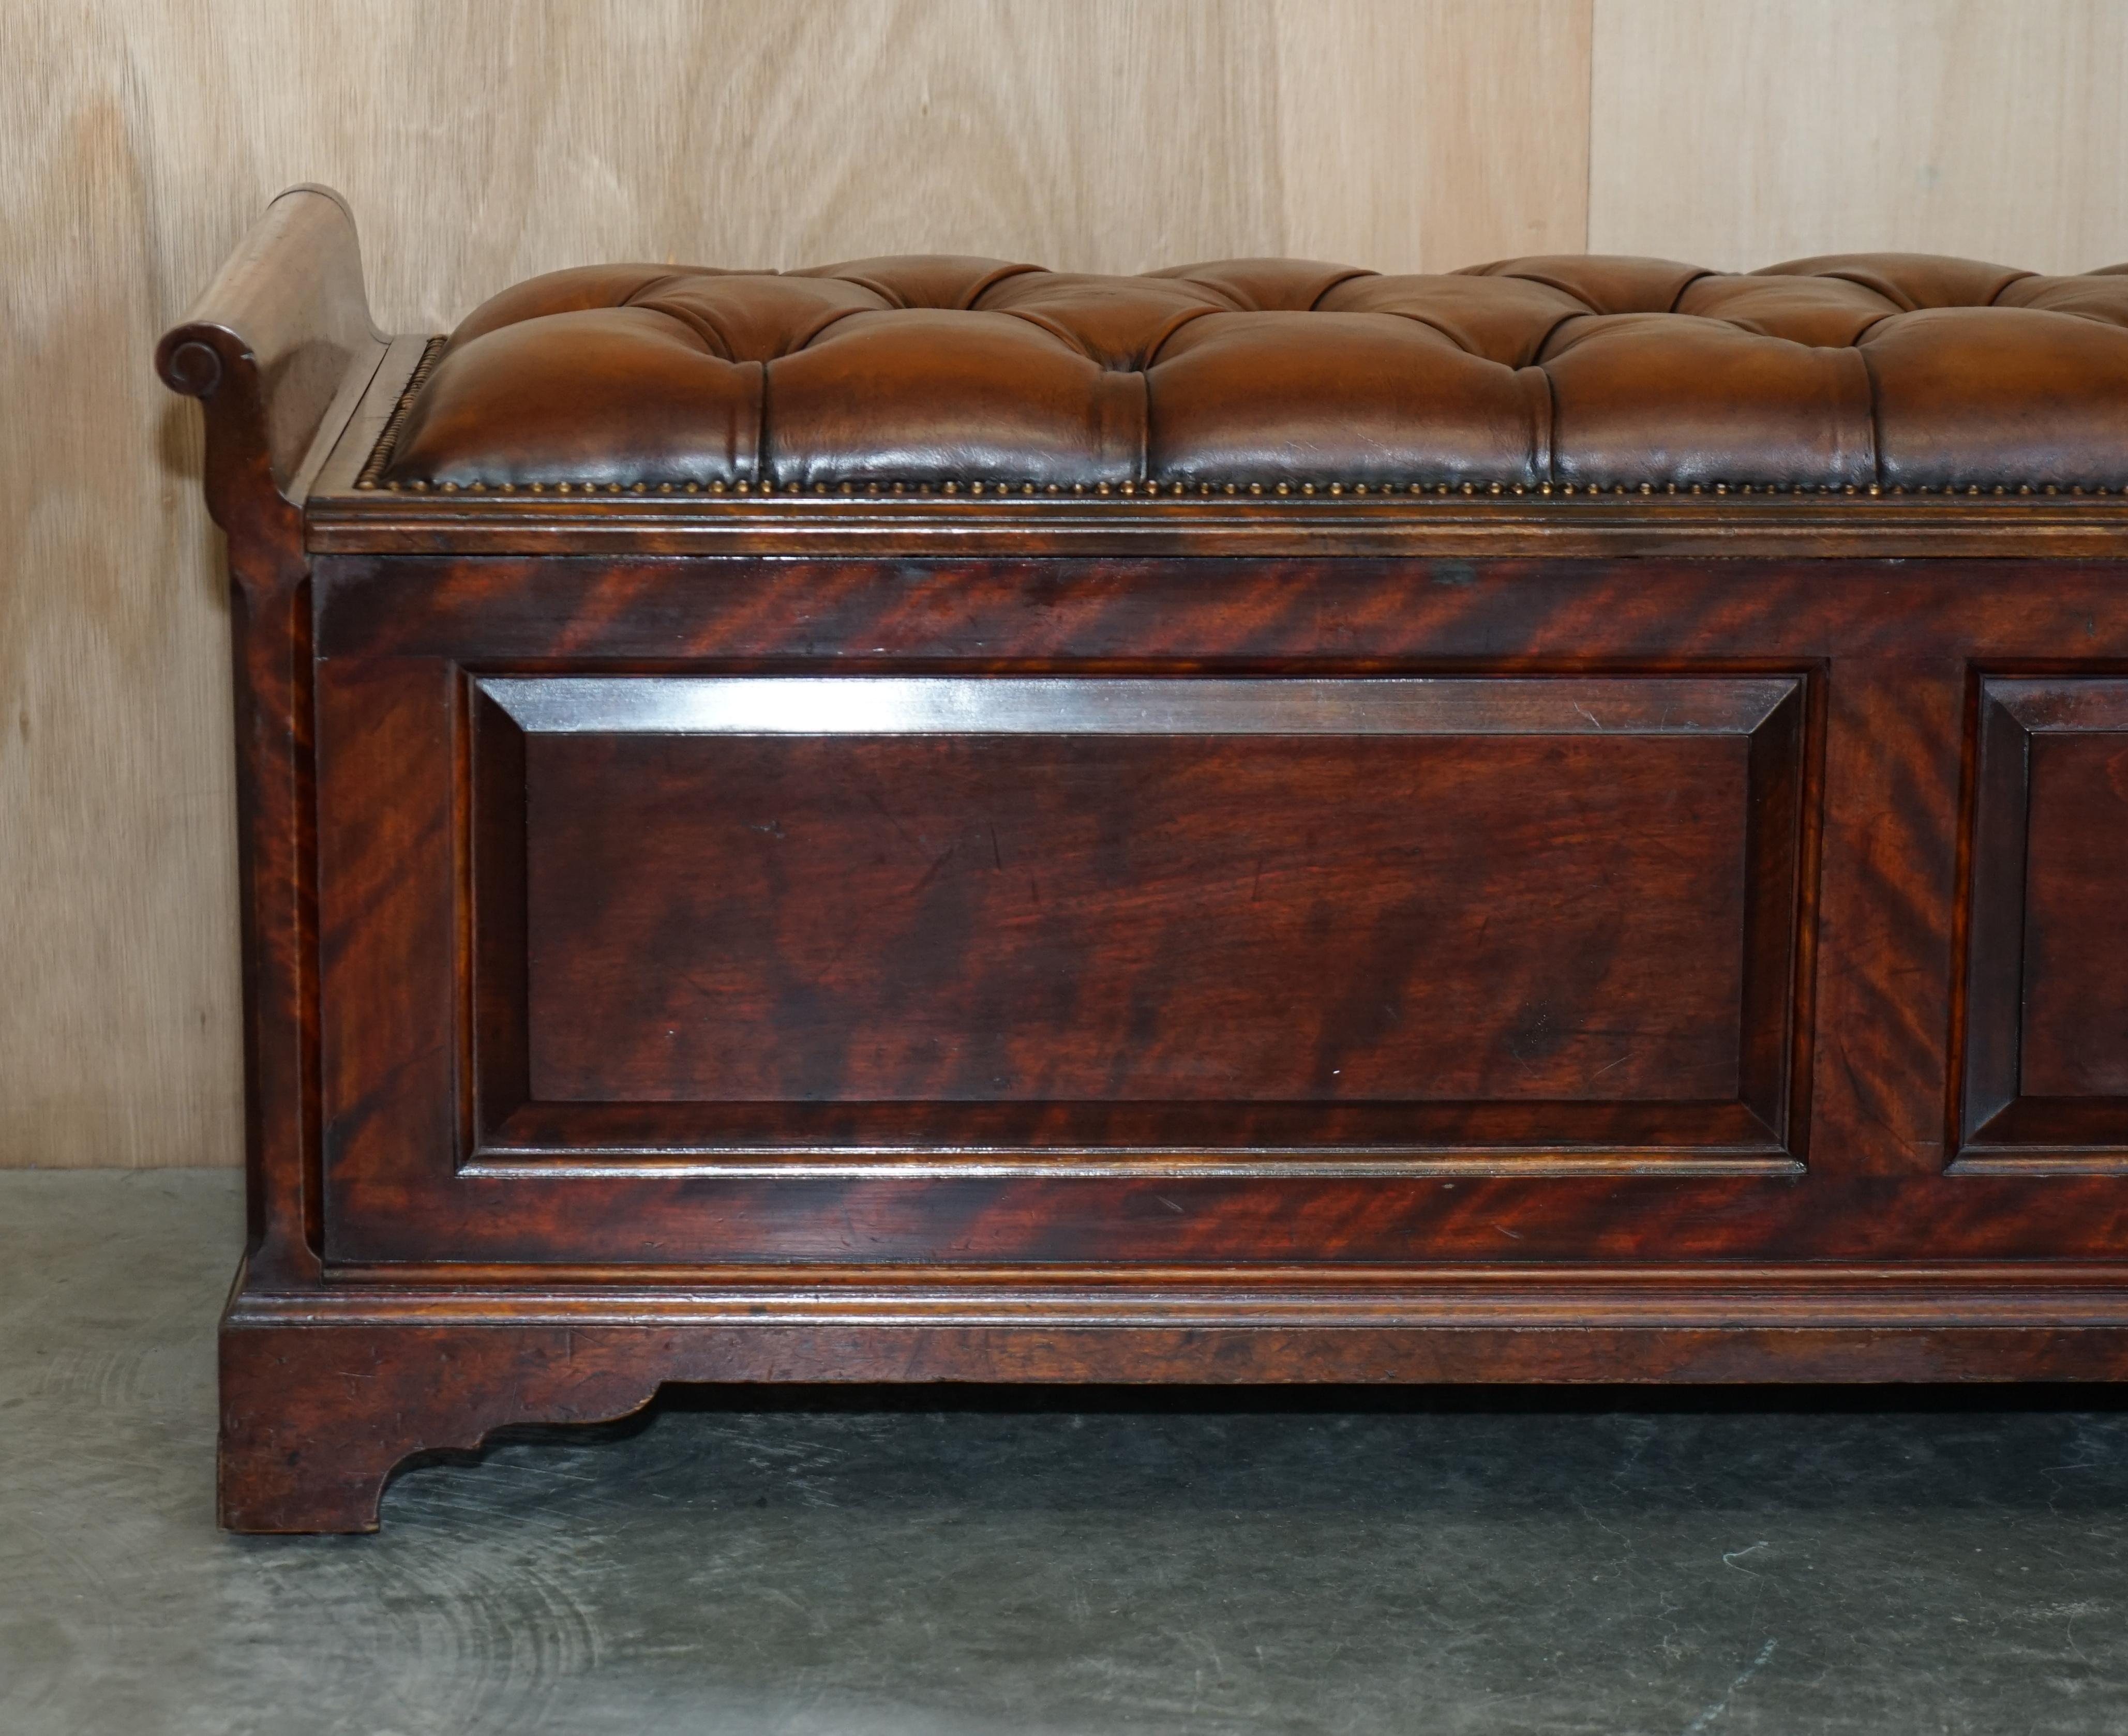 High Victorian Antique Restored Brown Leather Chesterfield Flamed Hardwood Hall Bench Ottoman For Sale